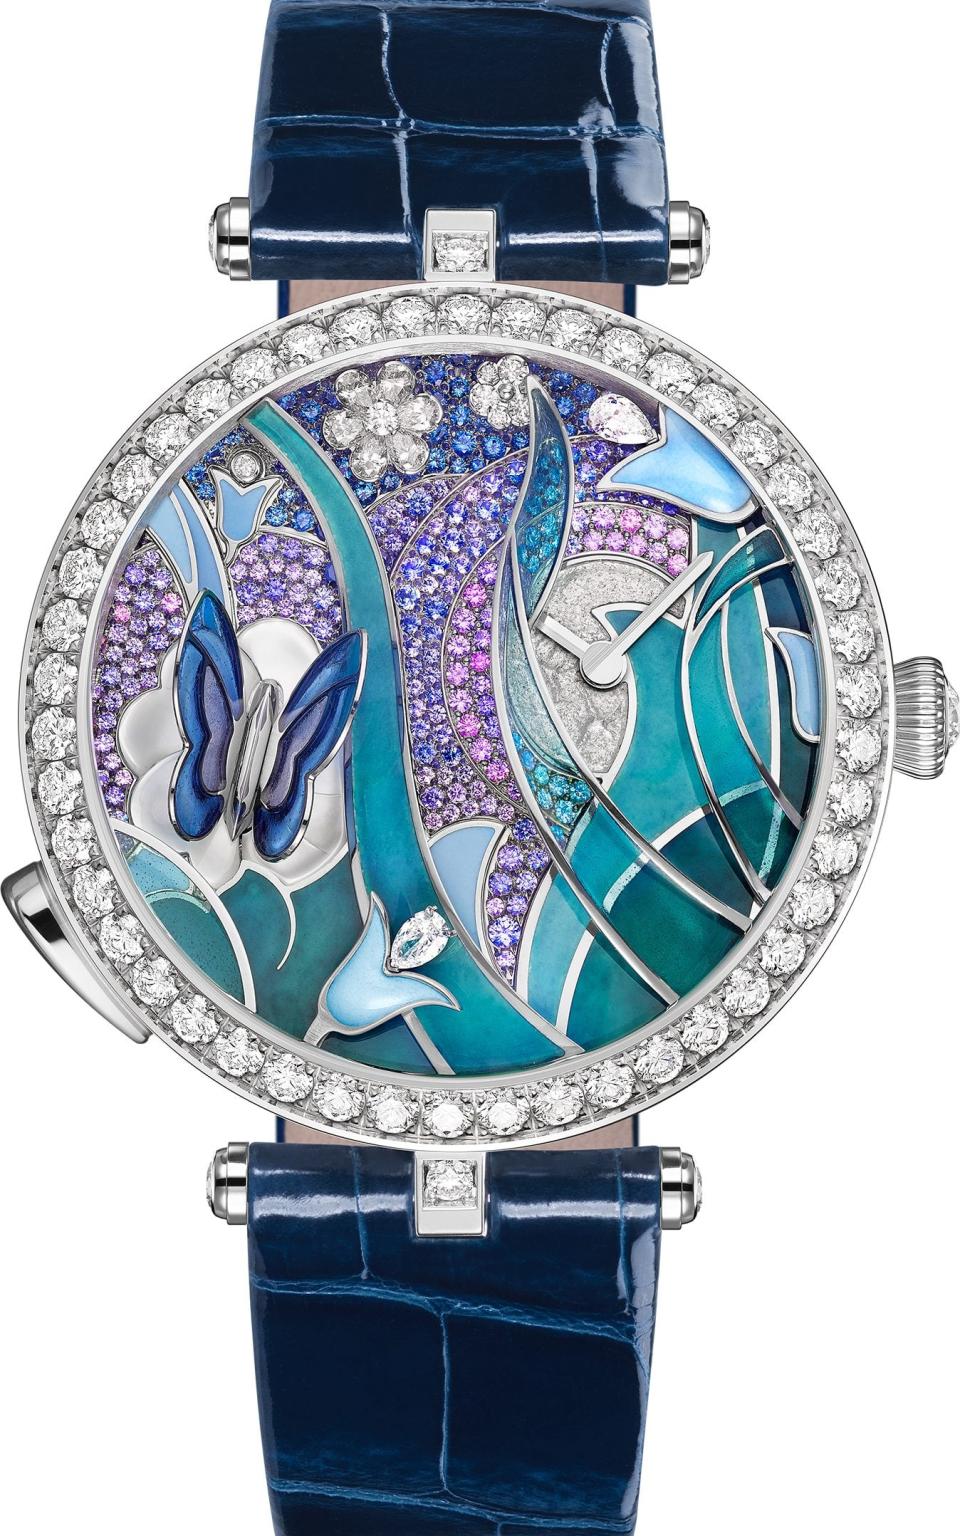 The Lady Arpels Papillon Automate features an enamelled jewelled butterfly that flutters it's wings at random intervals